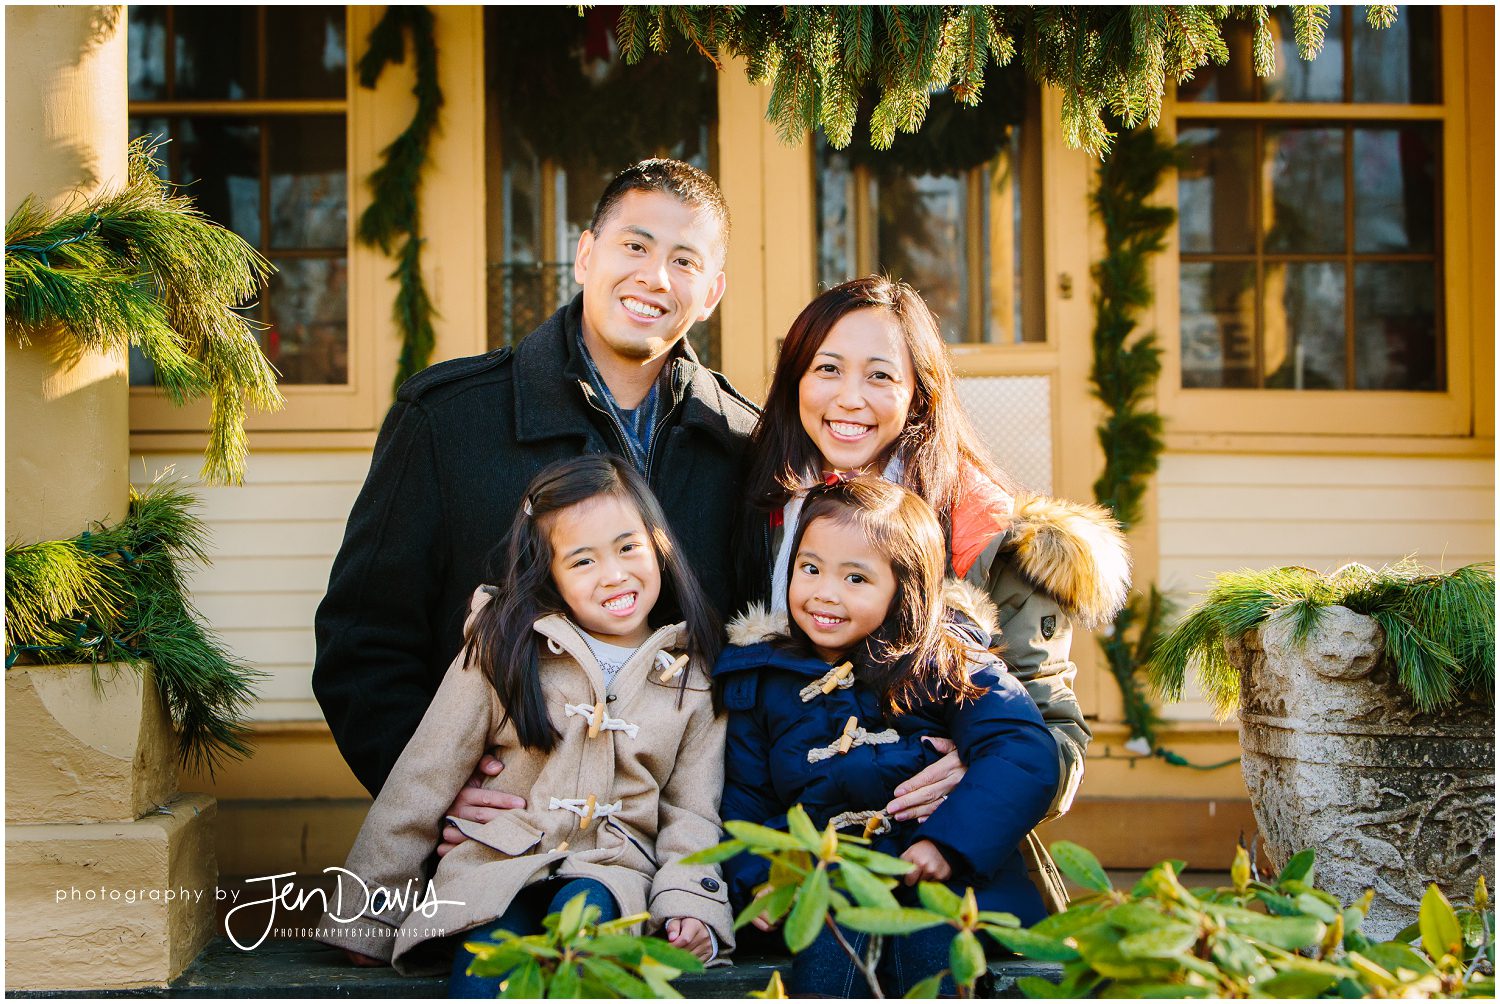 Family smiling in front of house decorated for Christmas